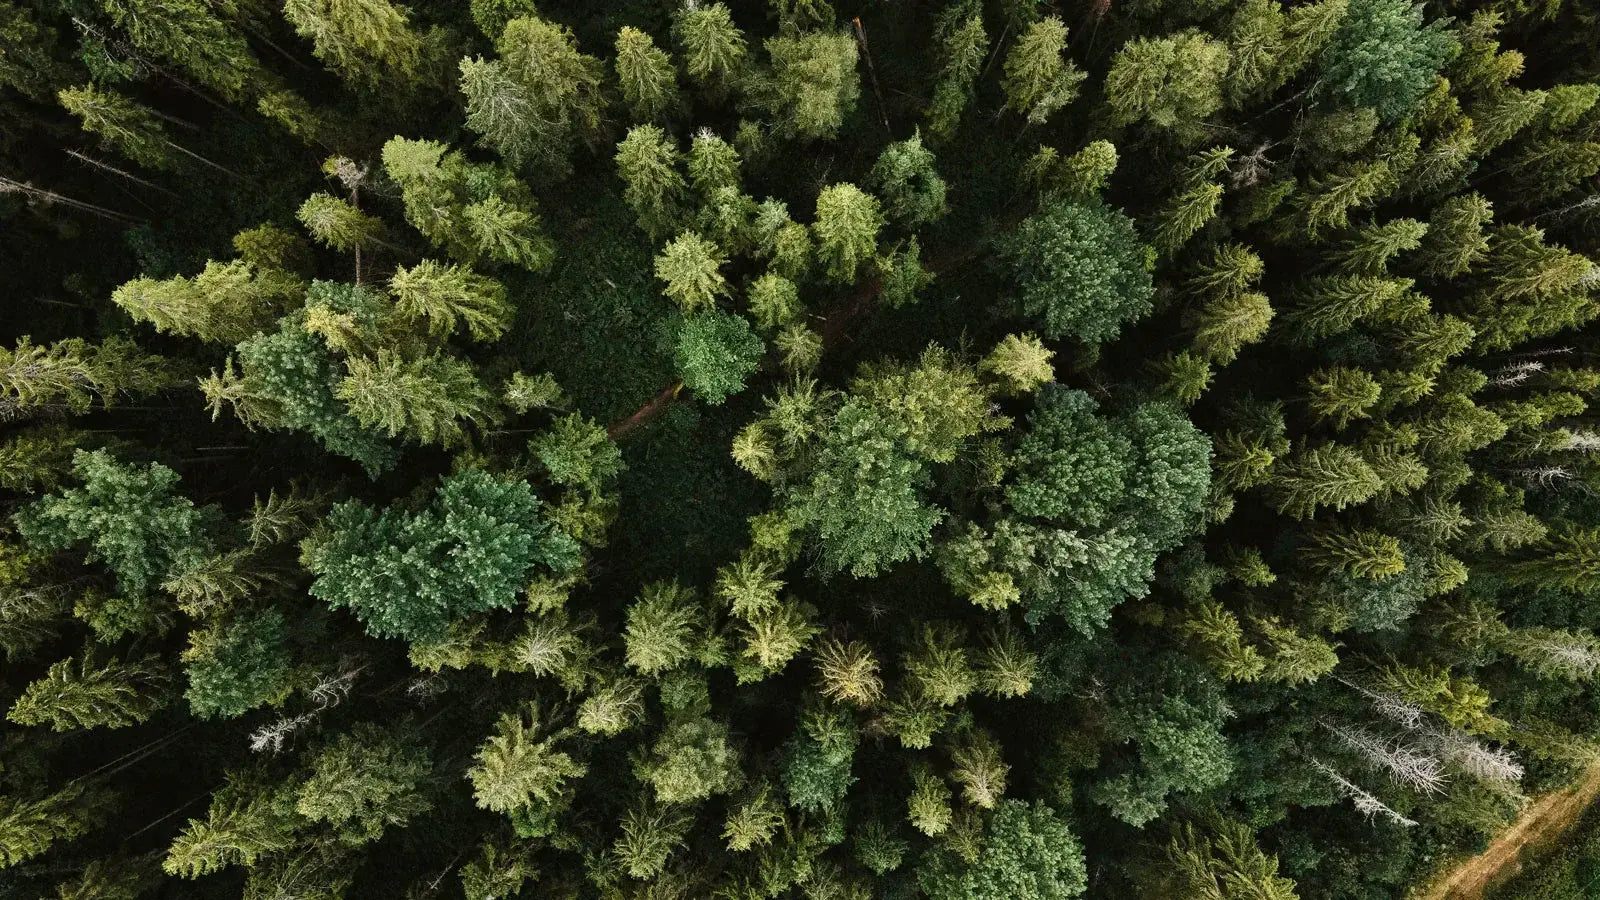 Top down view of a forest